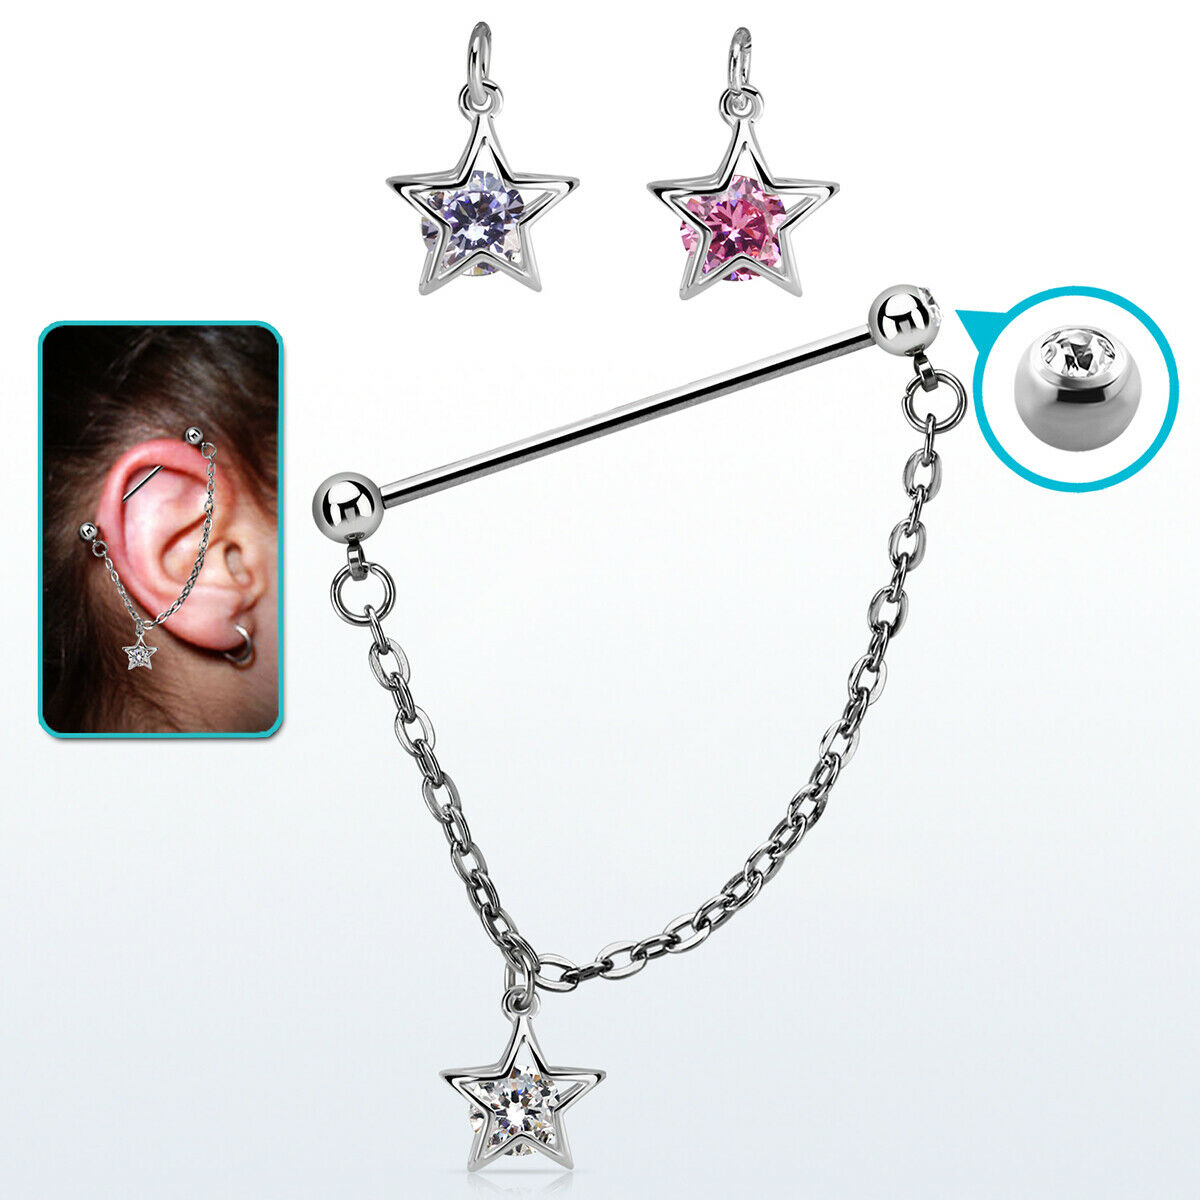 Ear industrial barbell 14g/1.6mm with a 5mm press fit gem ball and a 5mm steel ball linked with a chain with a star and a cubic zirconia dangling part